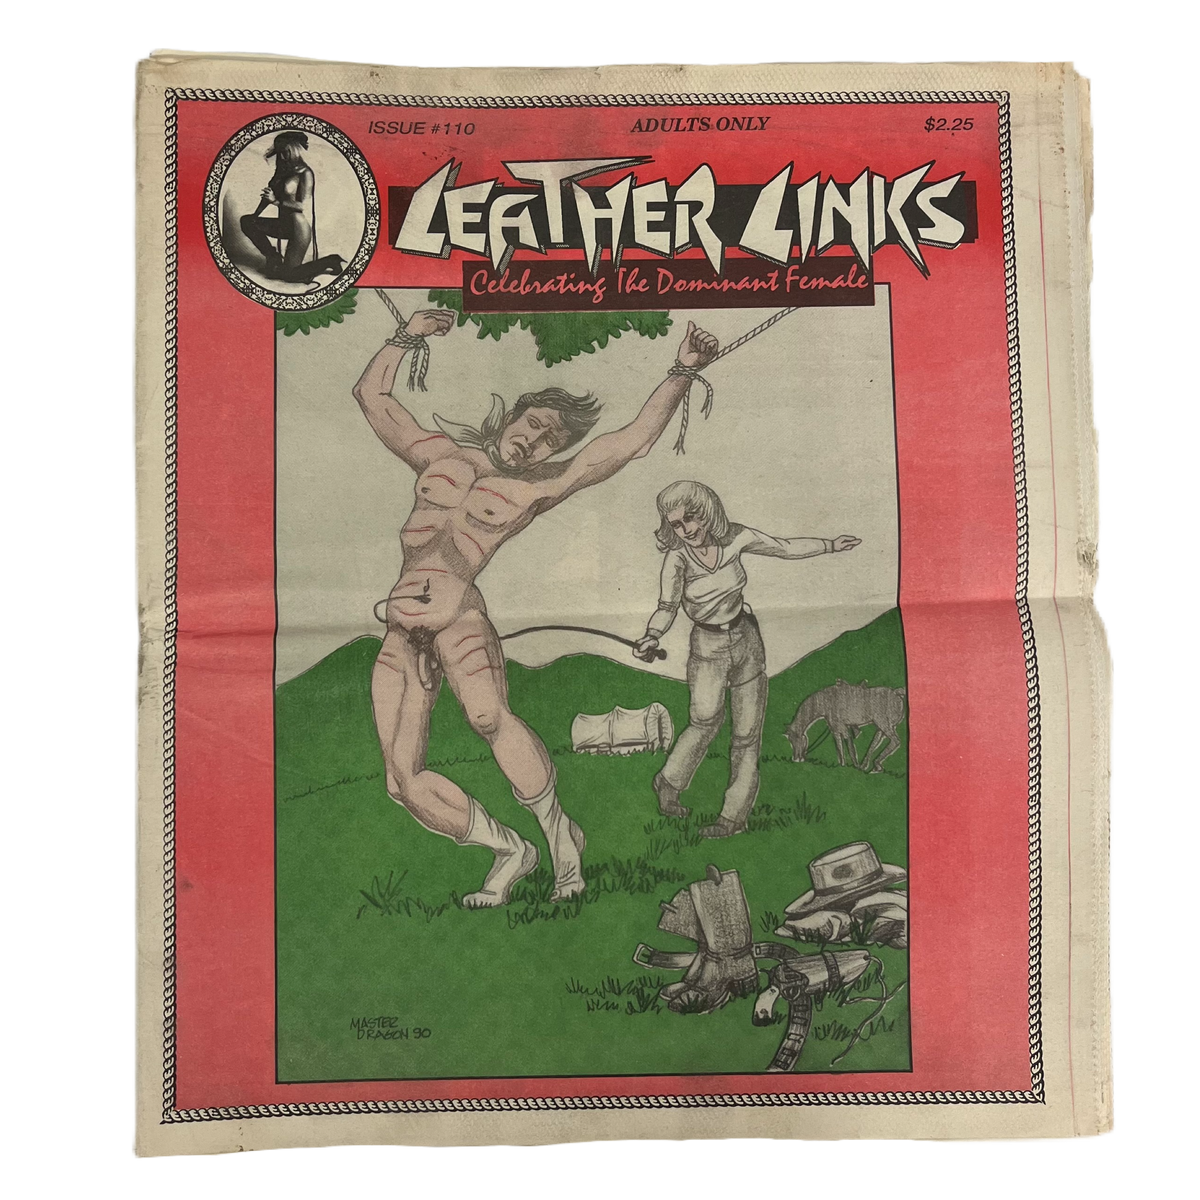 Vintage Leather Links &quot;Adults Only&quot; The Dominant Female Issue #110